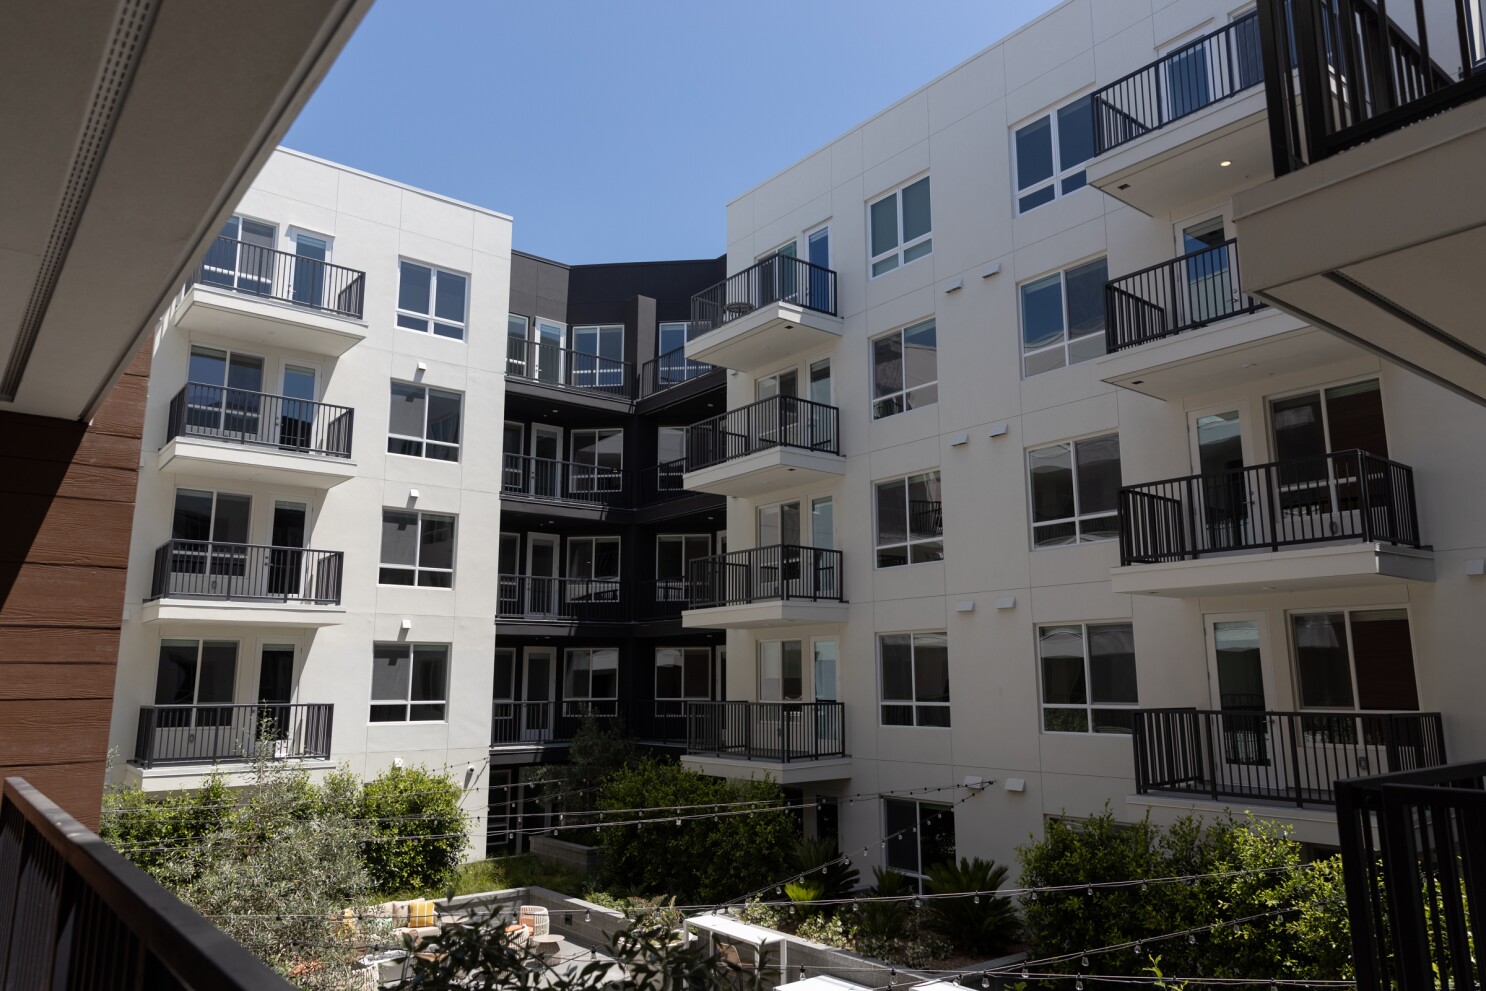 The Society, a Mission Valley apartment complex with $3.7K rent, finishes  3rd tower with plans for a 4th - The San Diego Union-Tribune